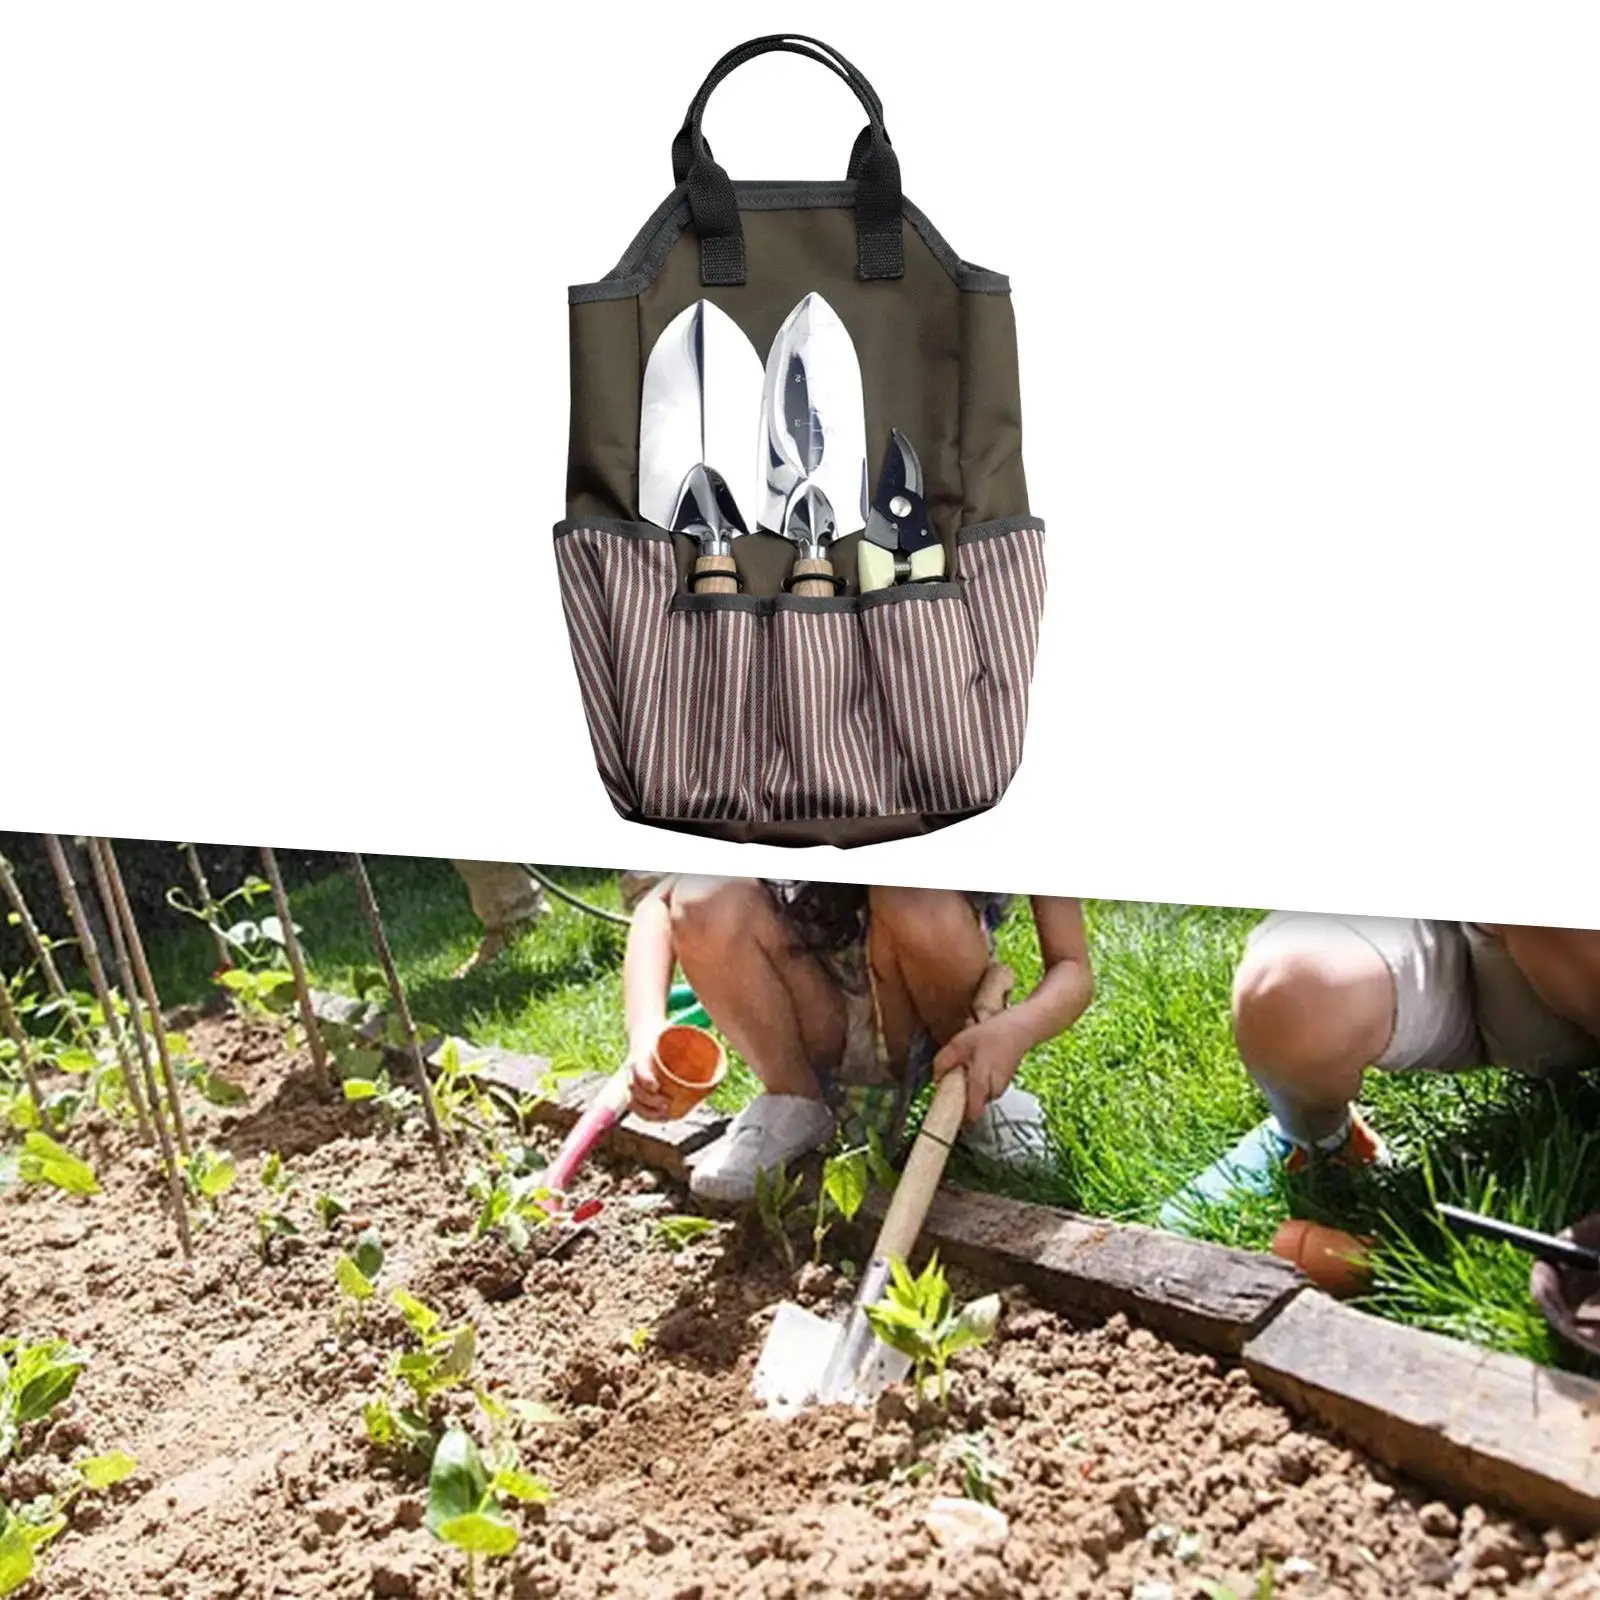 Garden Bags Heavy Duty Oxford Cloth Multipurpose Yard Tool Organizer with Handle Garden Tote Storage Bag for Gardening Gifts